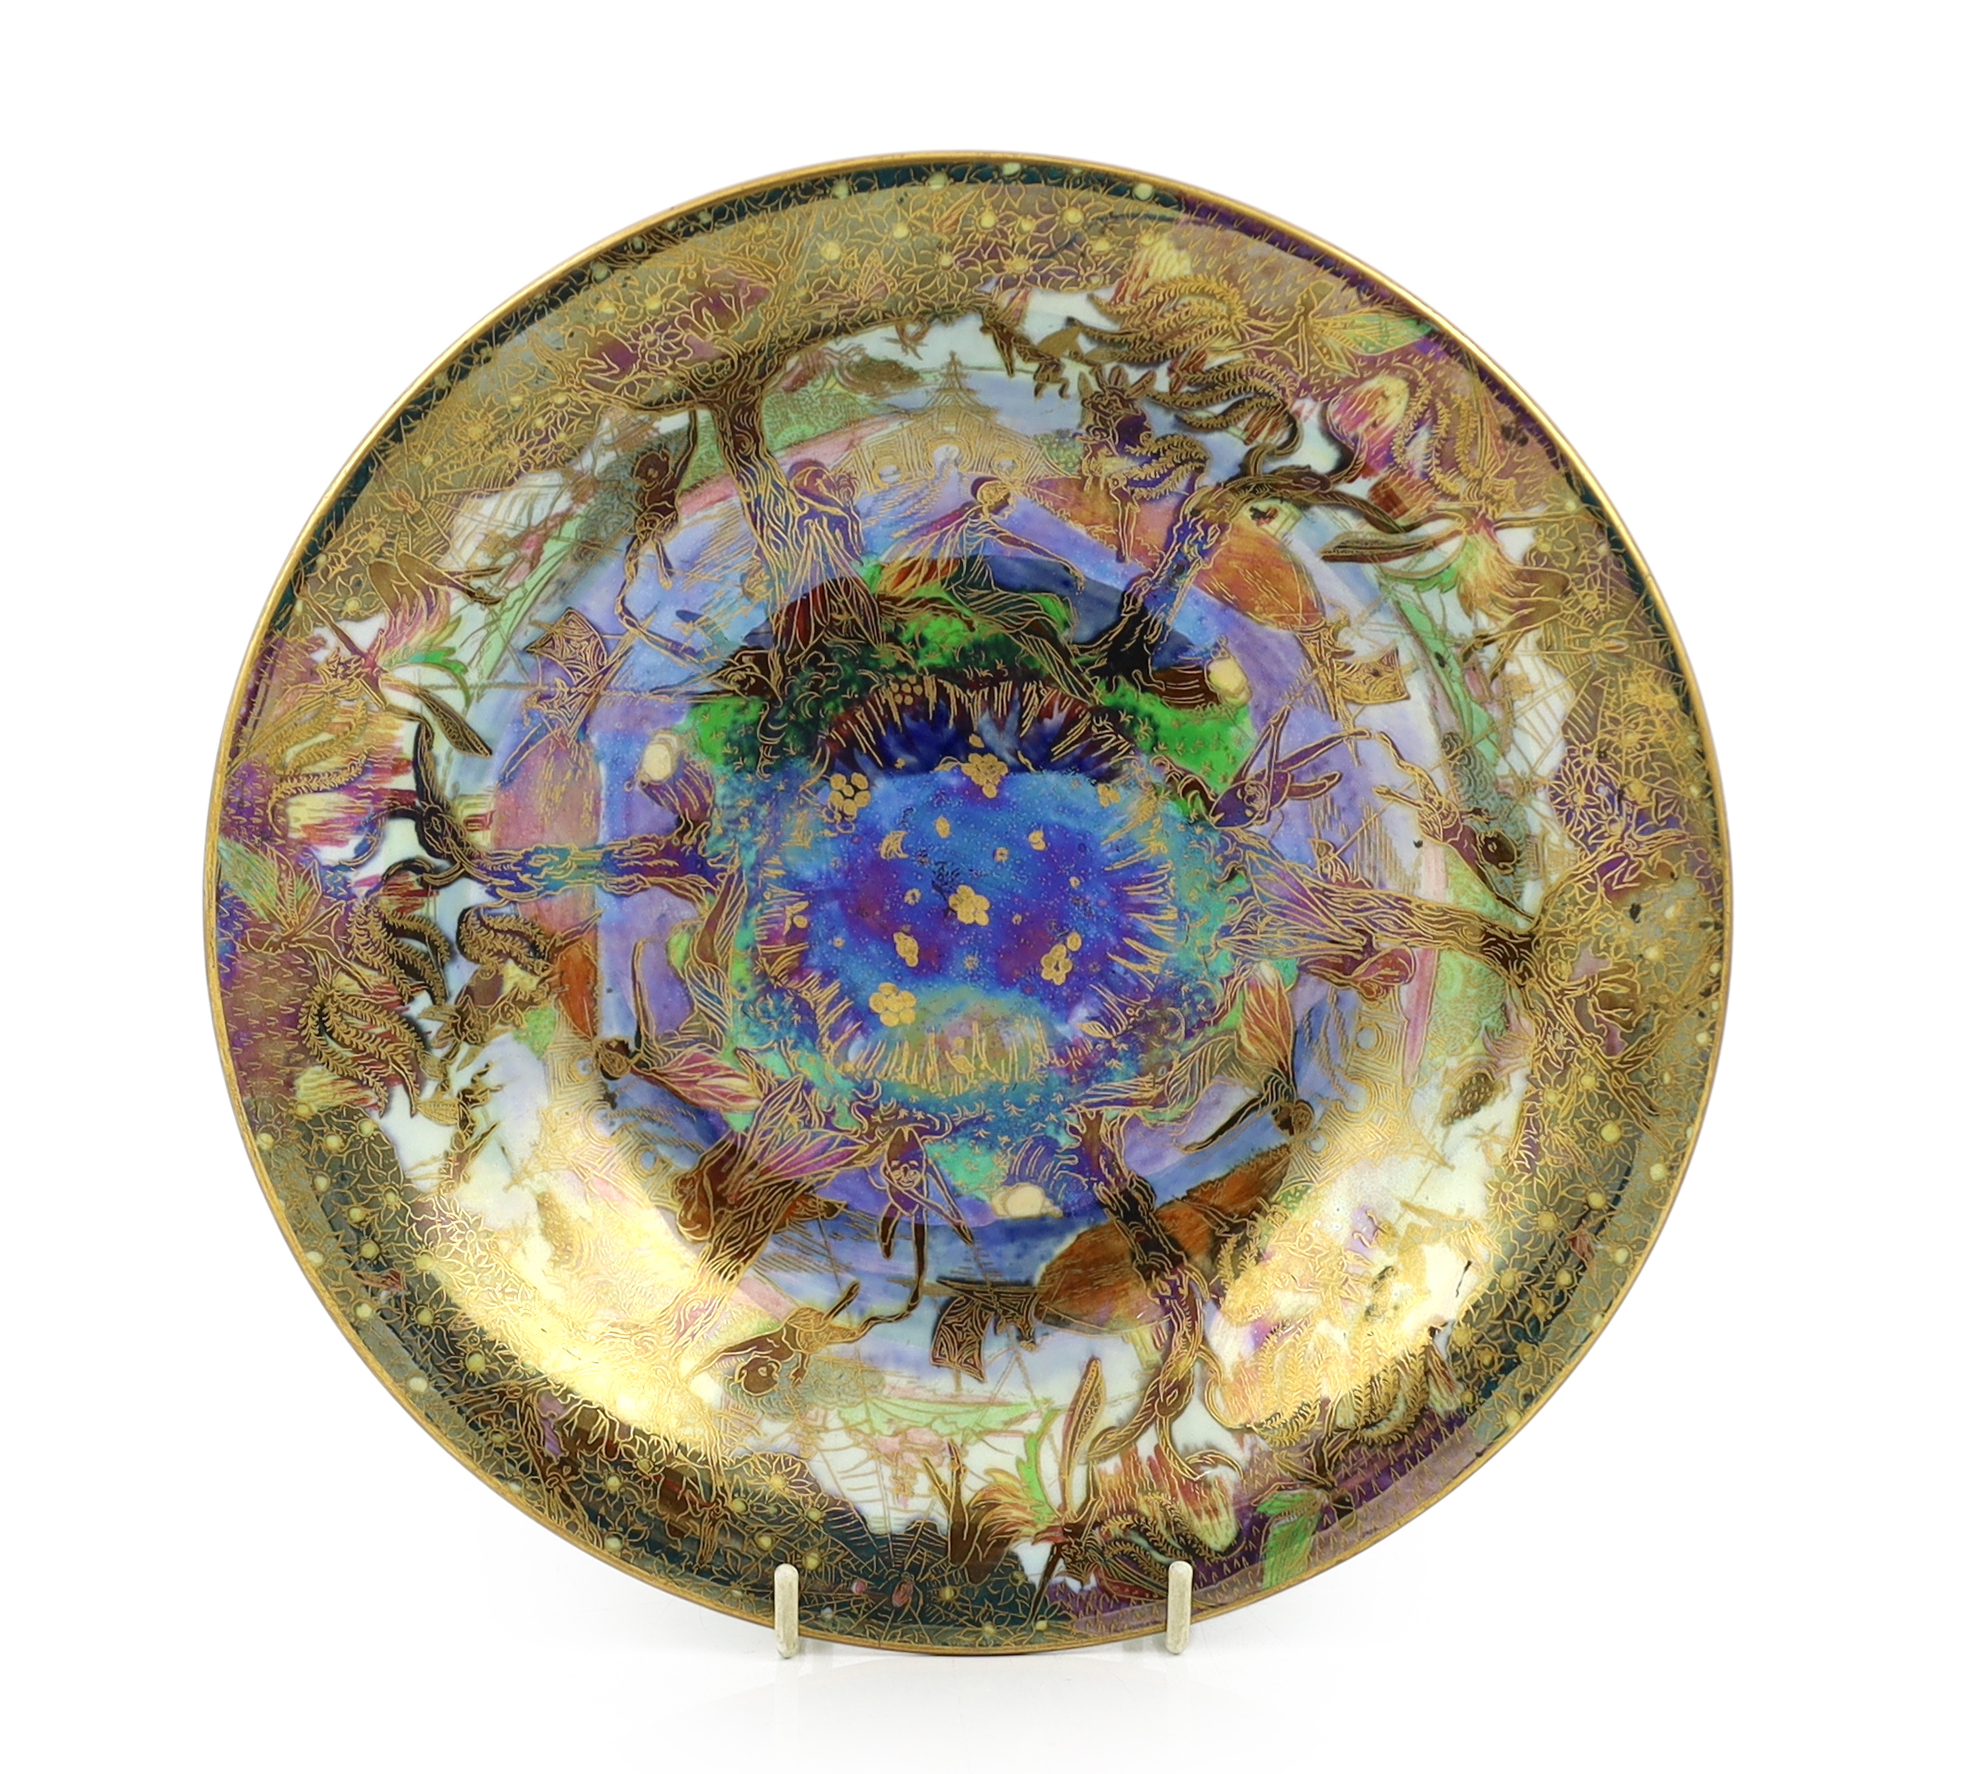 A Wedgwood Fairyland lustre ‘Jumping Faun’ Lily tray, designed by Daisy Makeig Jones, c.1925                                                                                                                                